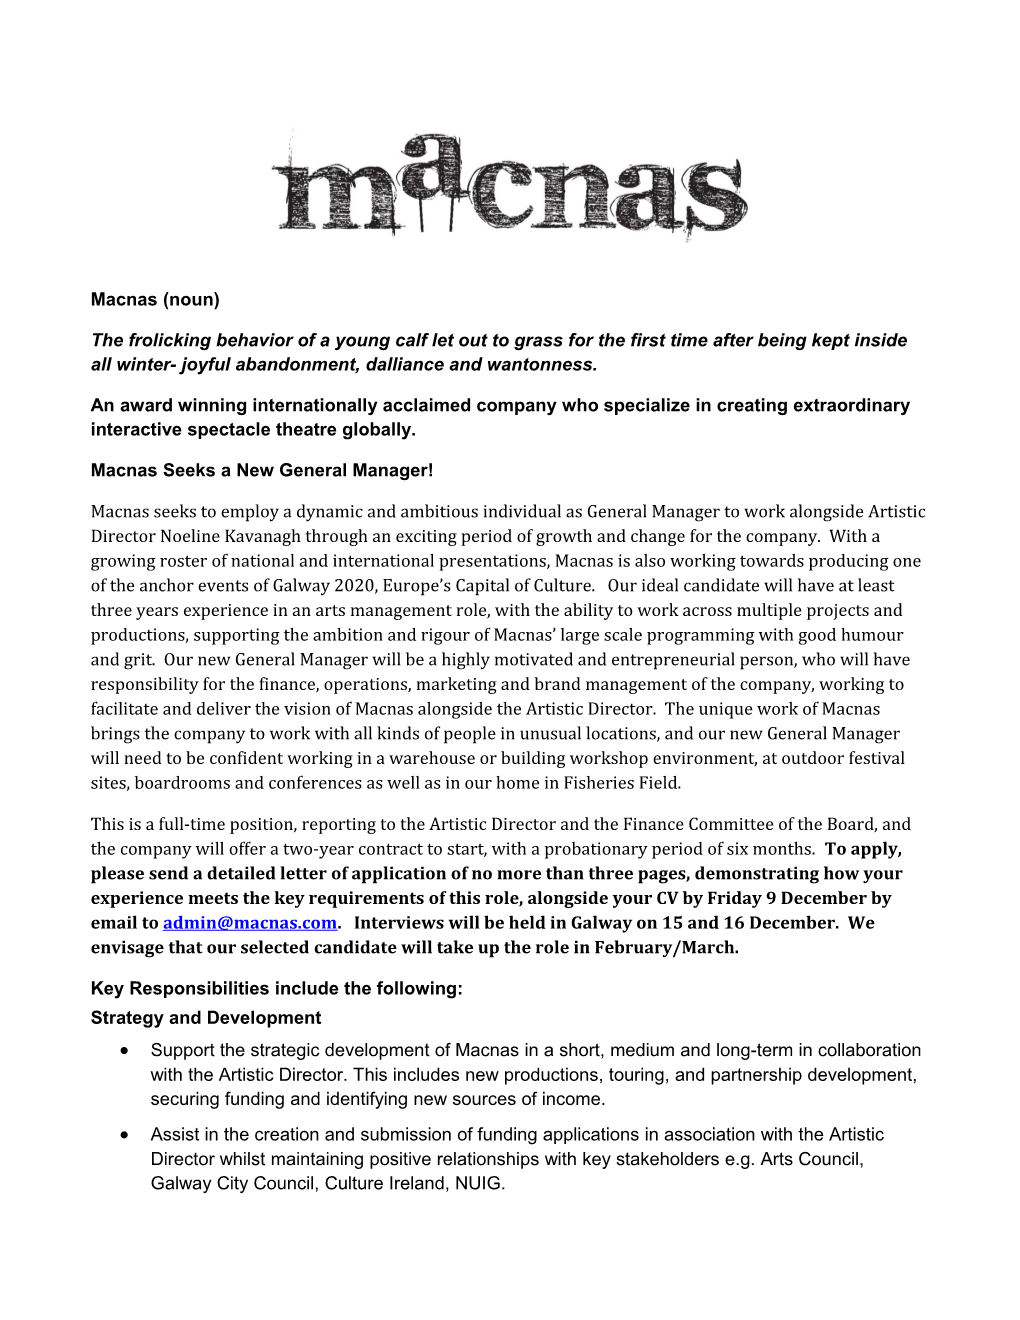 Macnas Seeks a New General Manager!